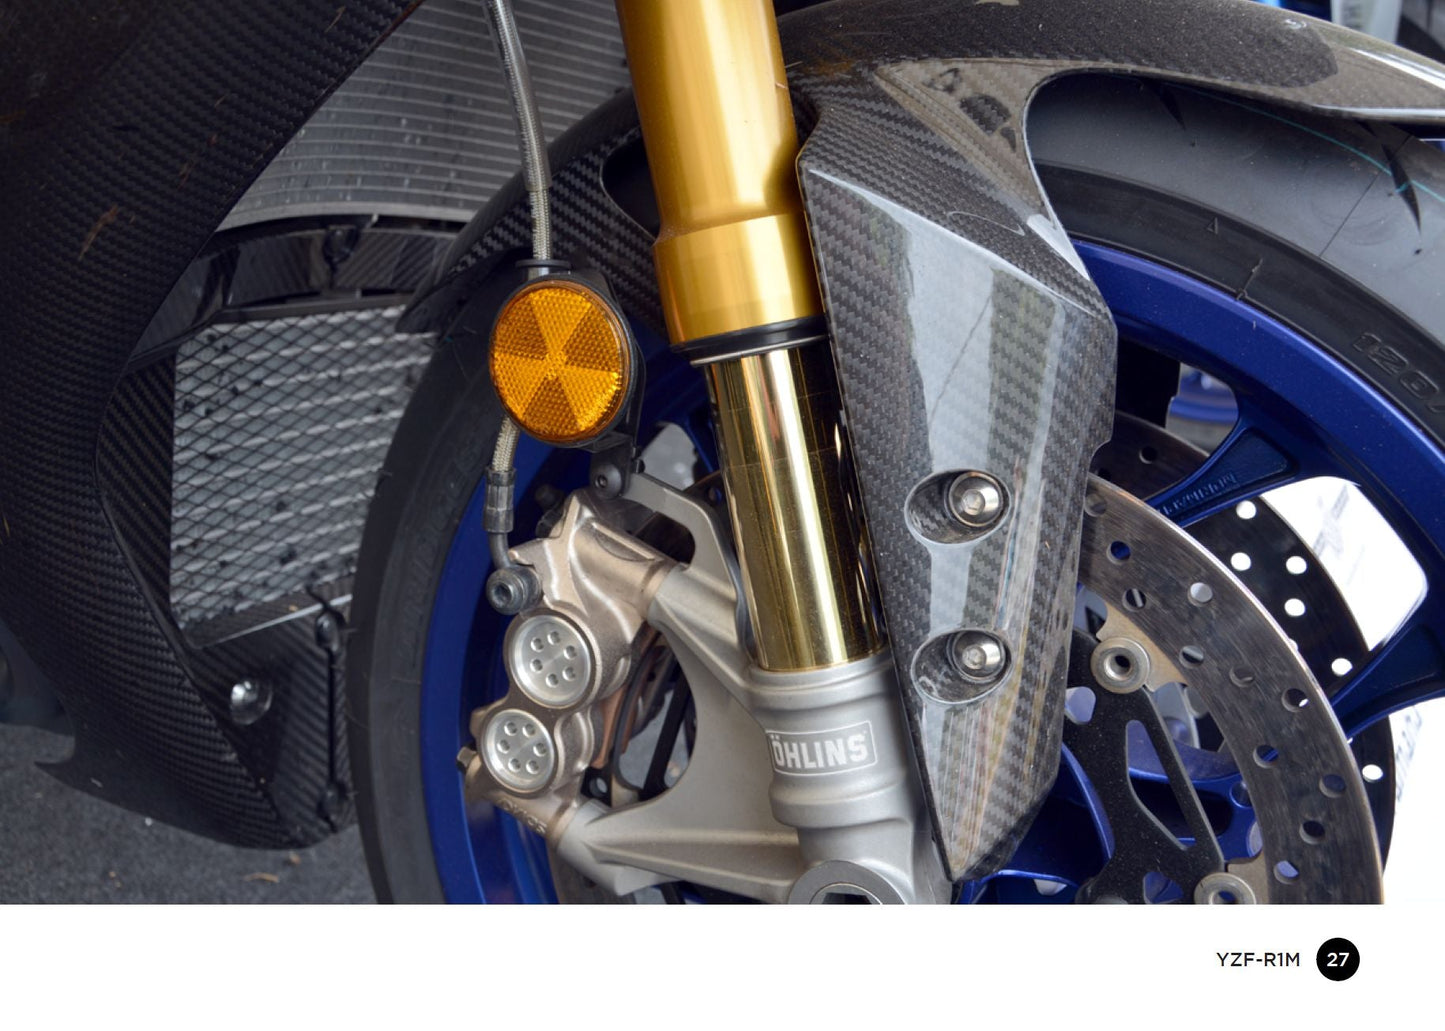 GUIDE RAPIDE YAMAHA YZF-R1M 